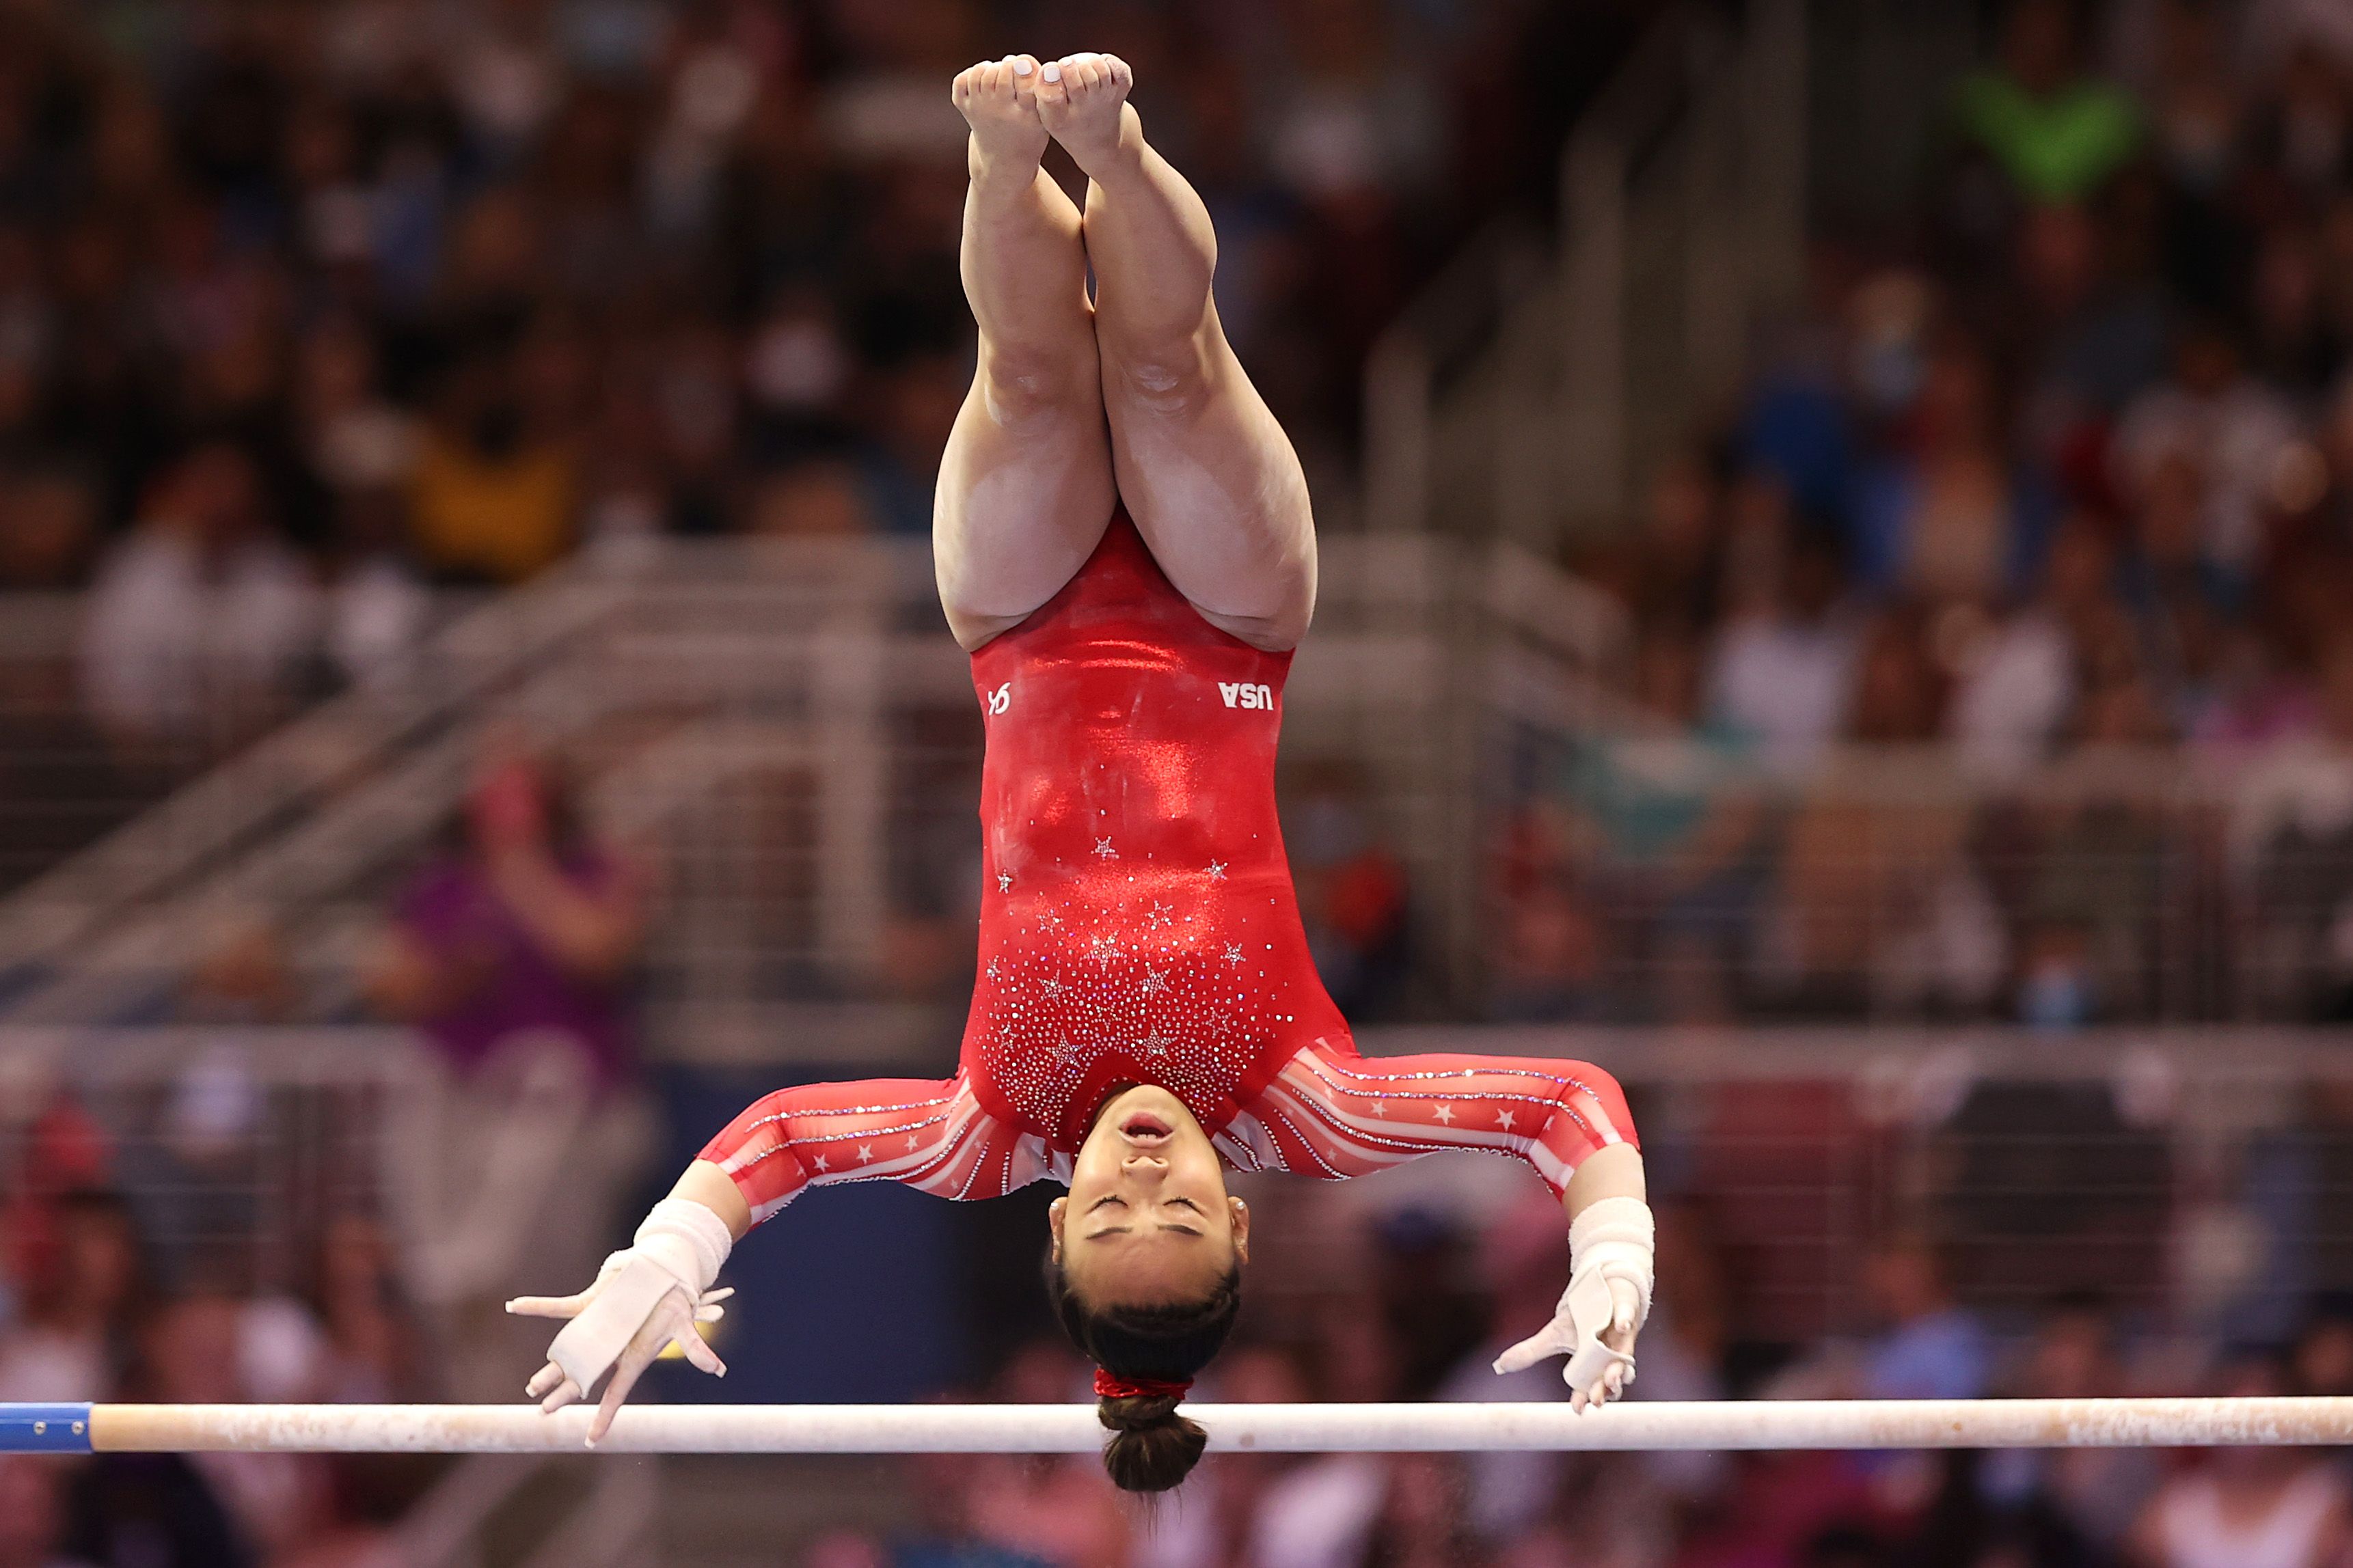 Photo of Suni Lee swinging in the air in a red uniform upside down over a bar